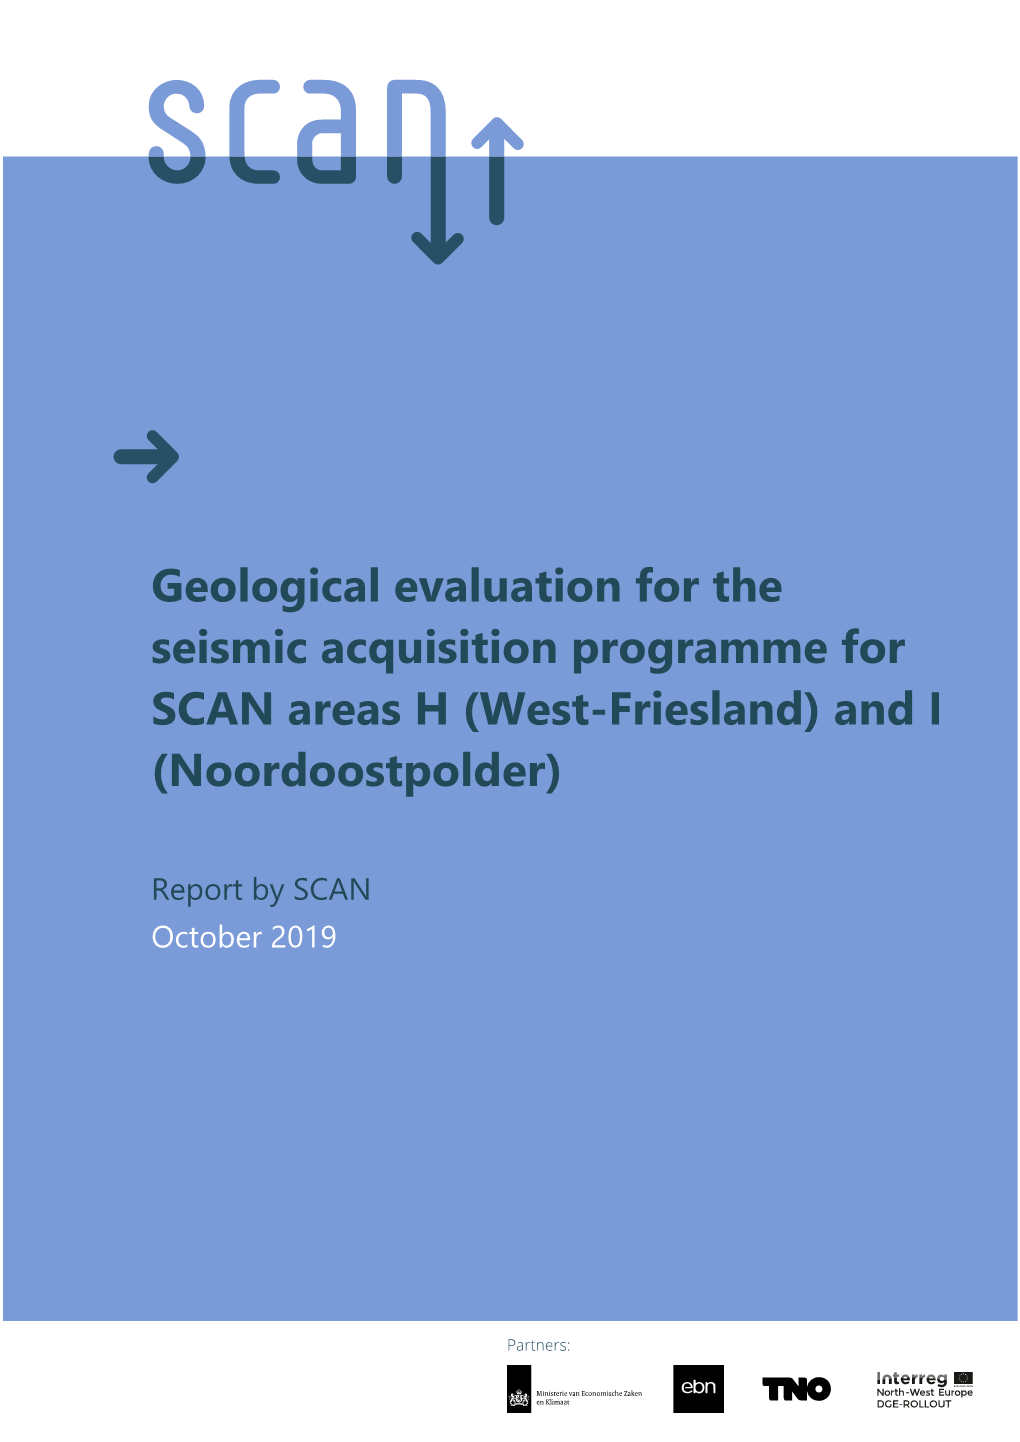 Geological Evaluation for the Seismic Acquisition Programme for SCAN Areas H (West-Friesland) and I (Noordoostpolder)